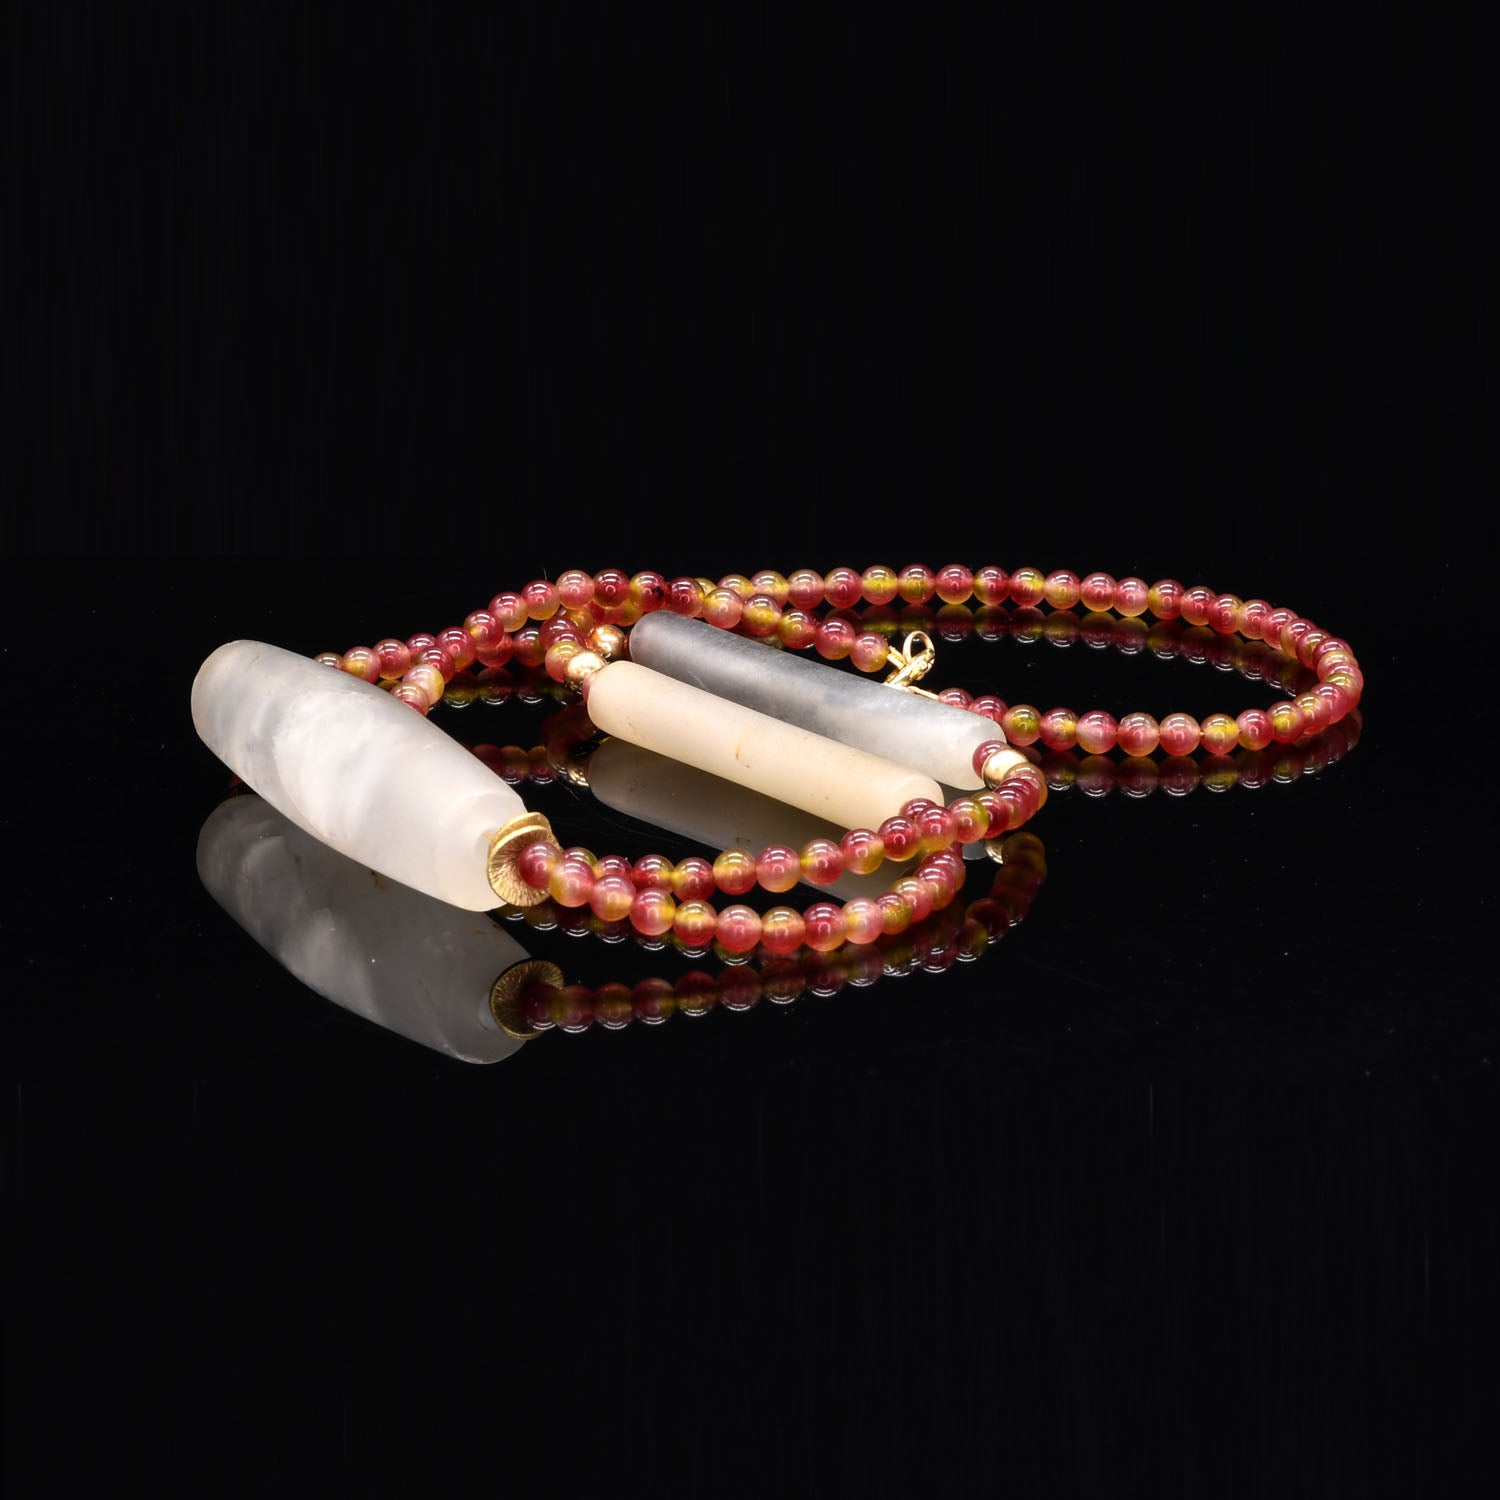 A Tairona Quartzite and Chalcedony Bead Necklace, ca. 800 - 1500 CE